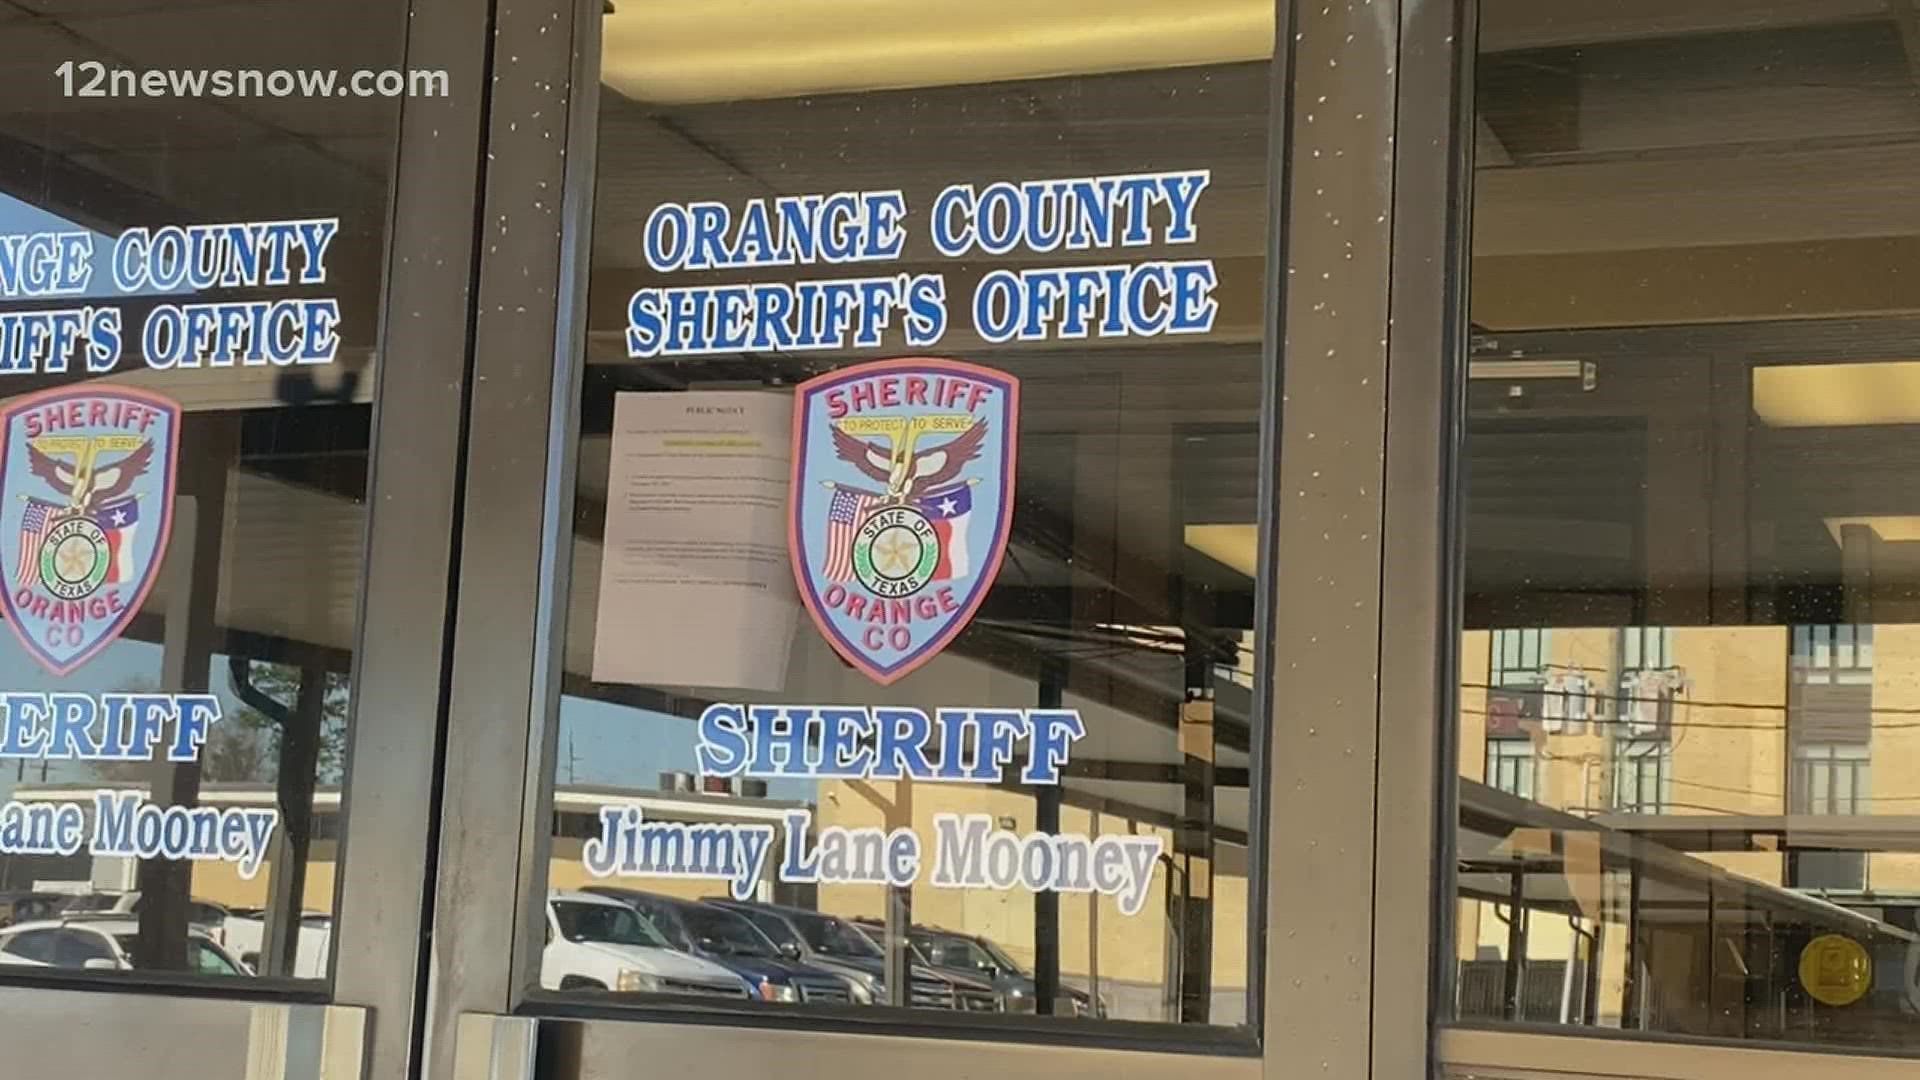 CLEAT released a statement claiming that recent actions by Sheriff Jimmy Lane Mooney were, "punitive and oppressive." Mooney denies these claims.